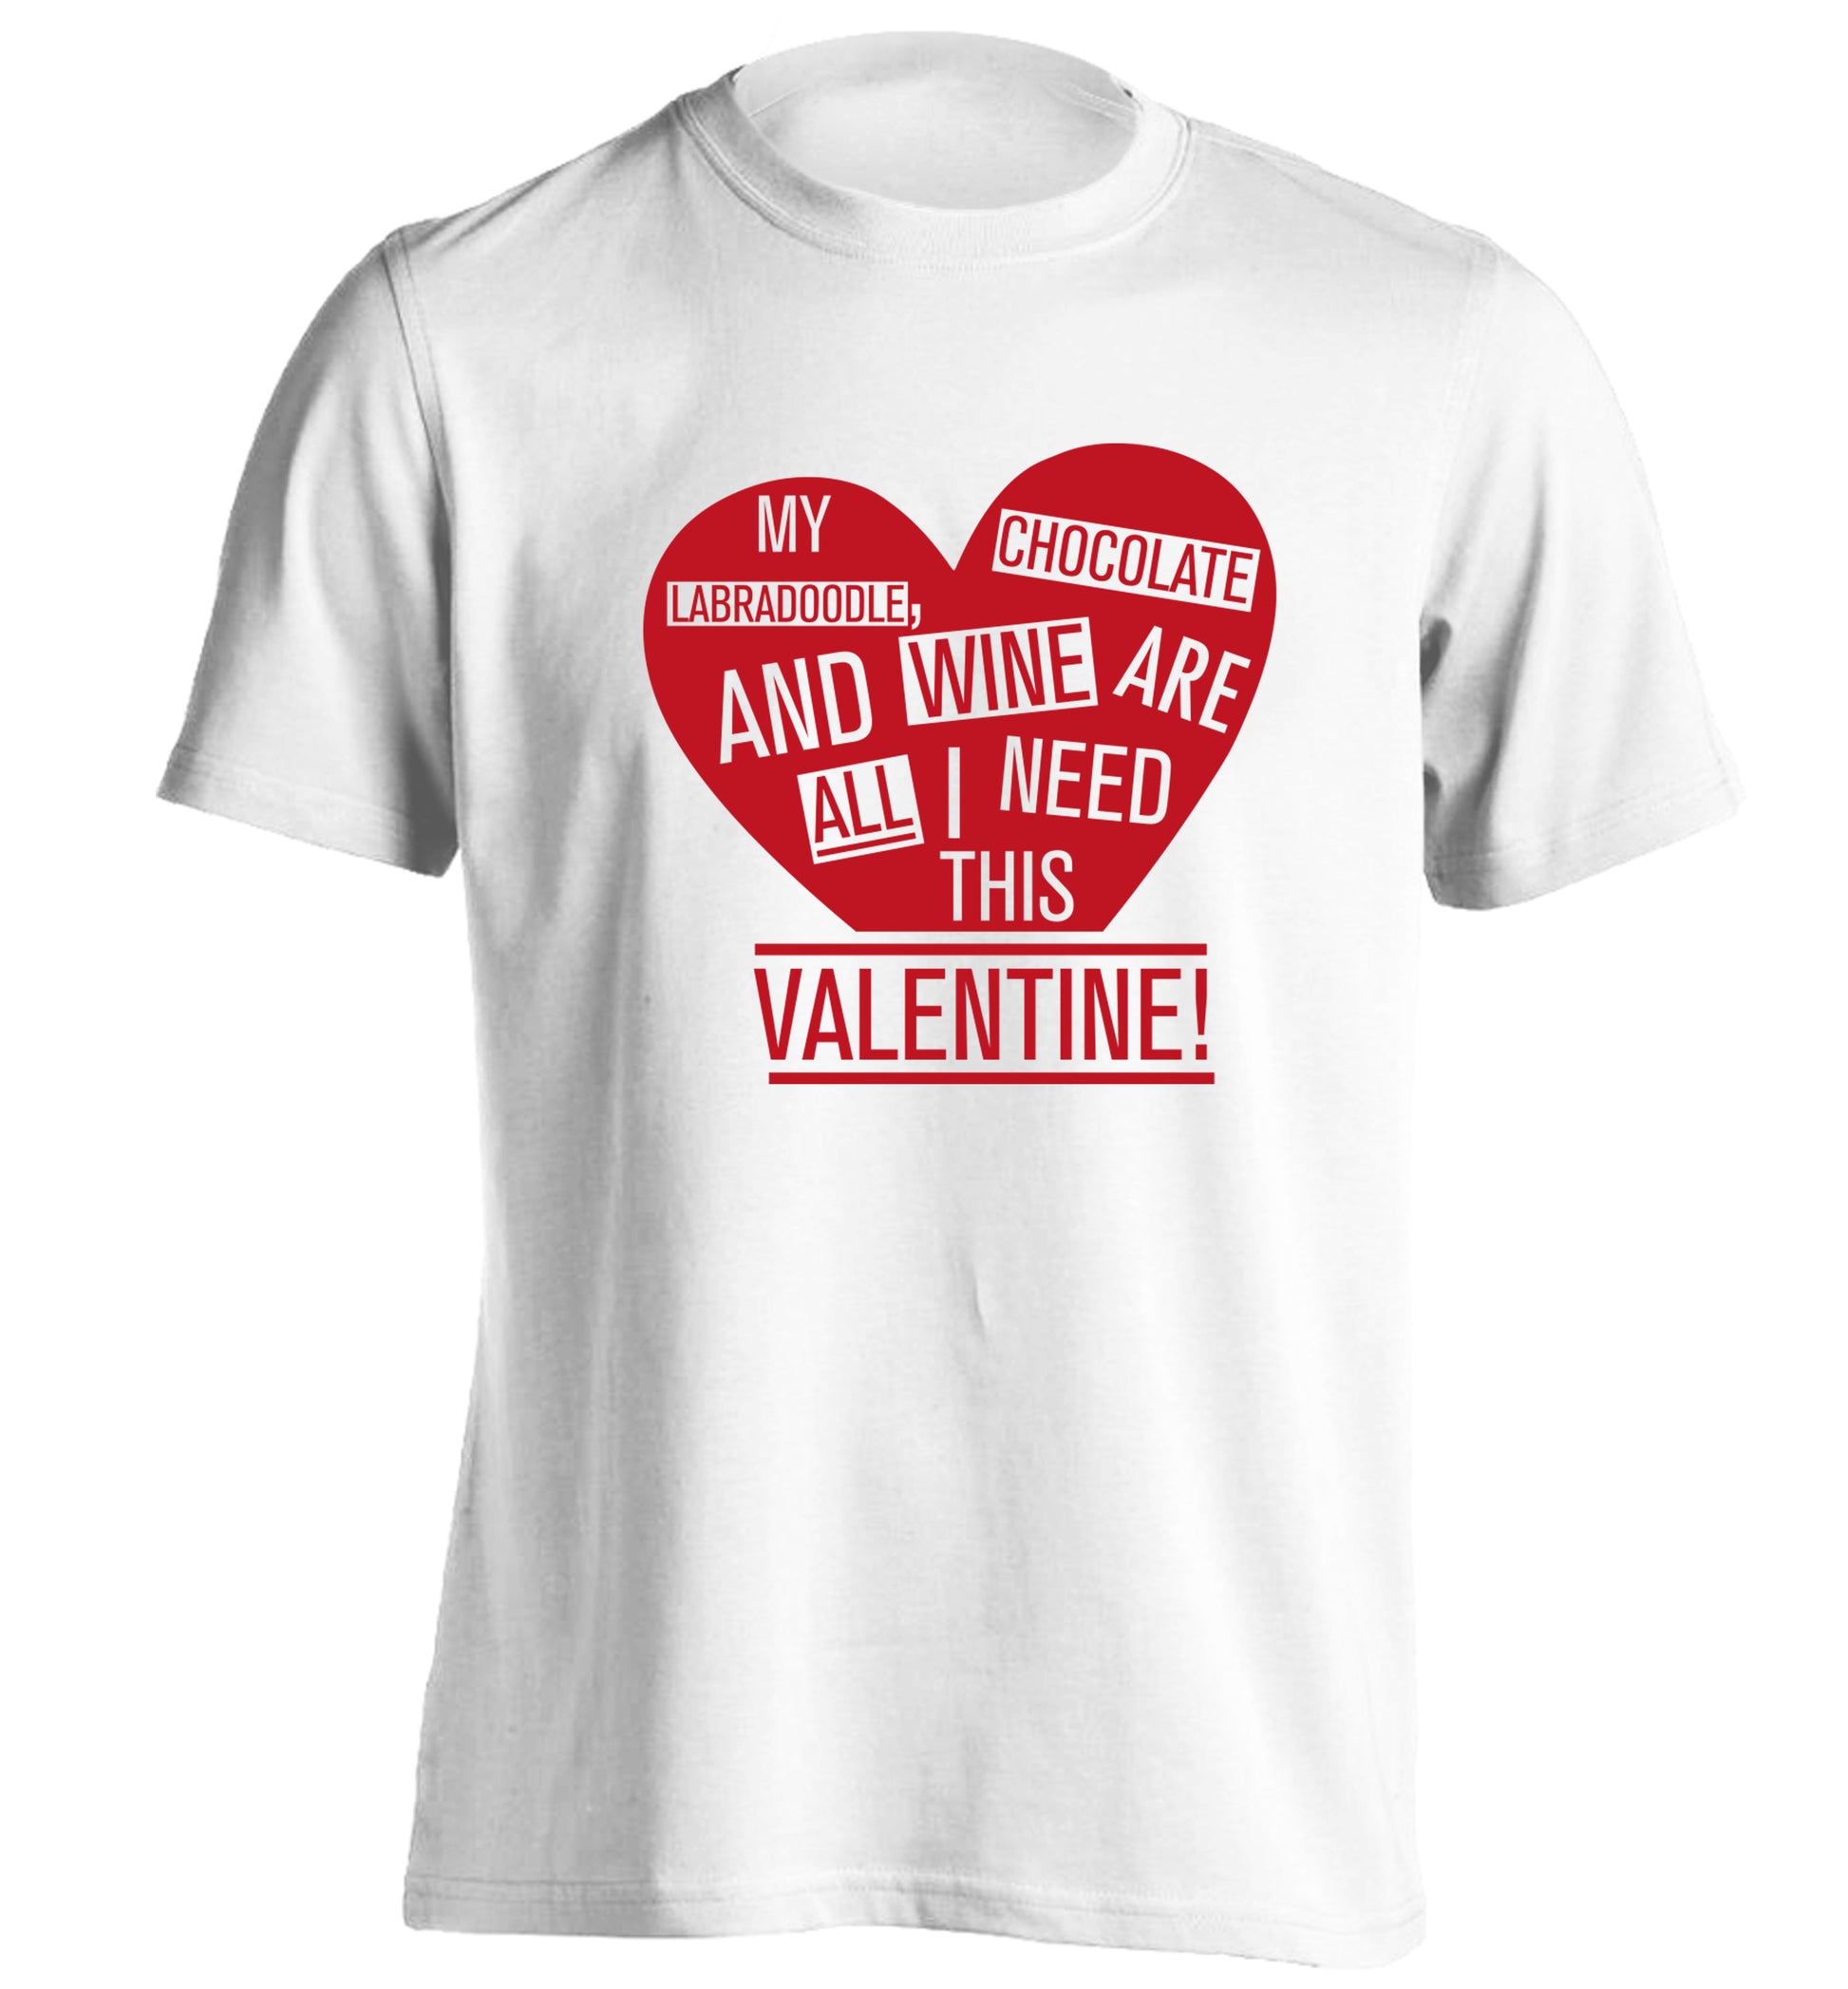 My labradoodle, chocolate and wine are all I need this valentine! adults unisex white Tshirt 2XL